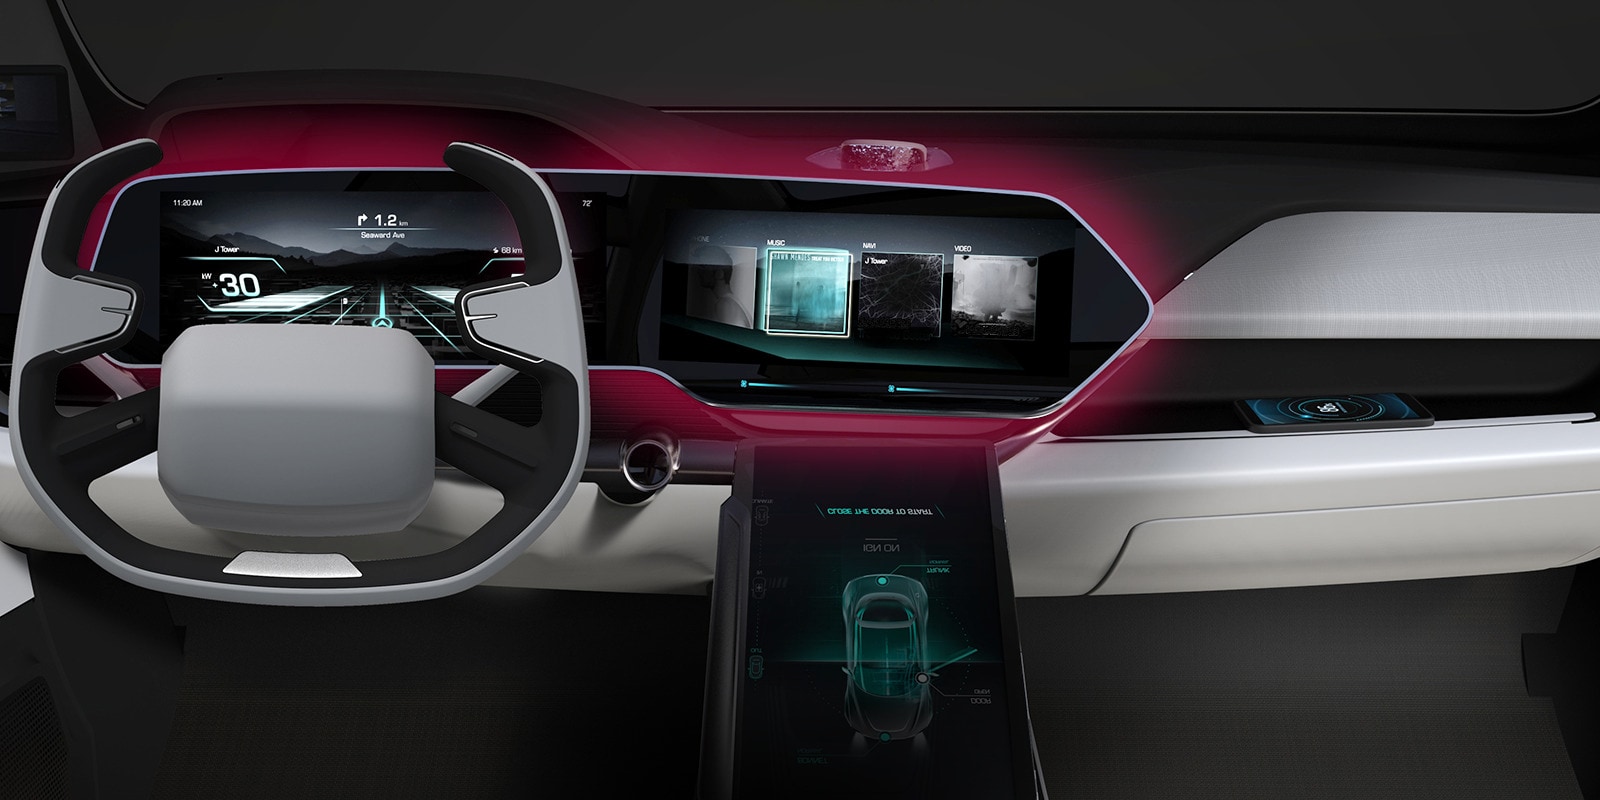 https://www.lg.com/global/mobility/images/automotive-display/automotive-display_2_d_re.jpg